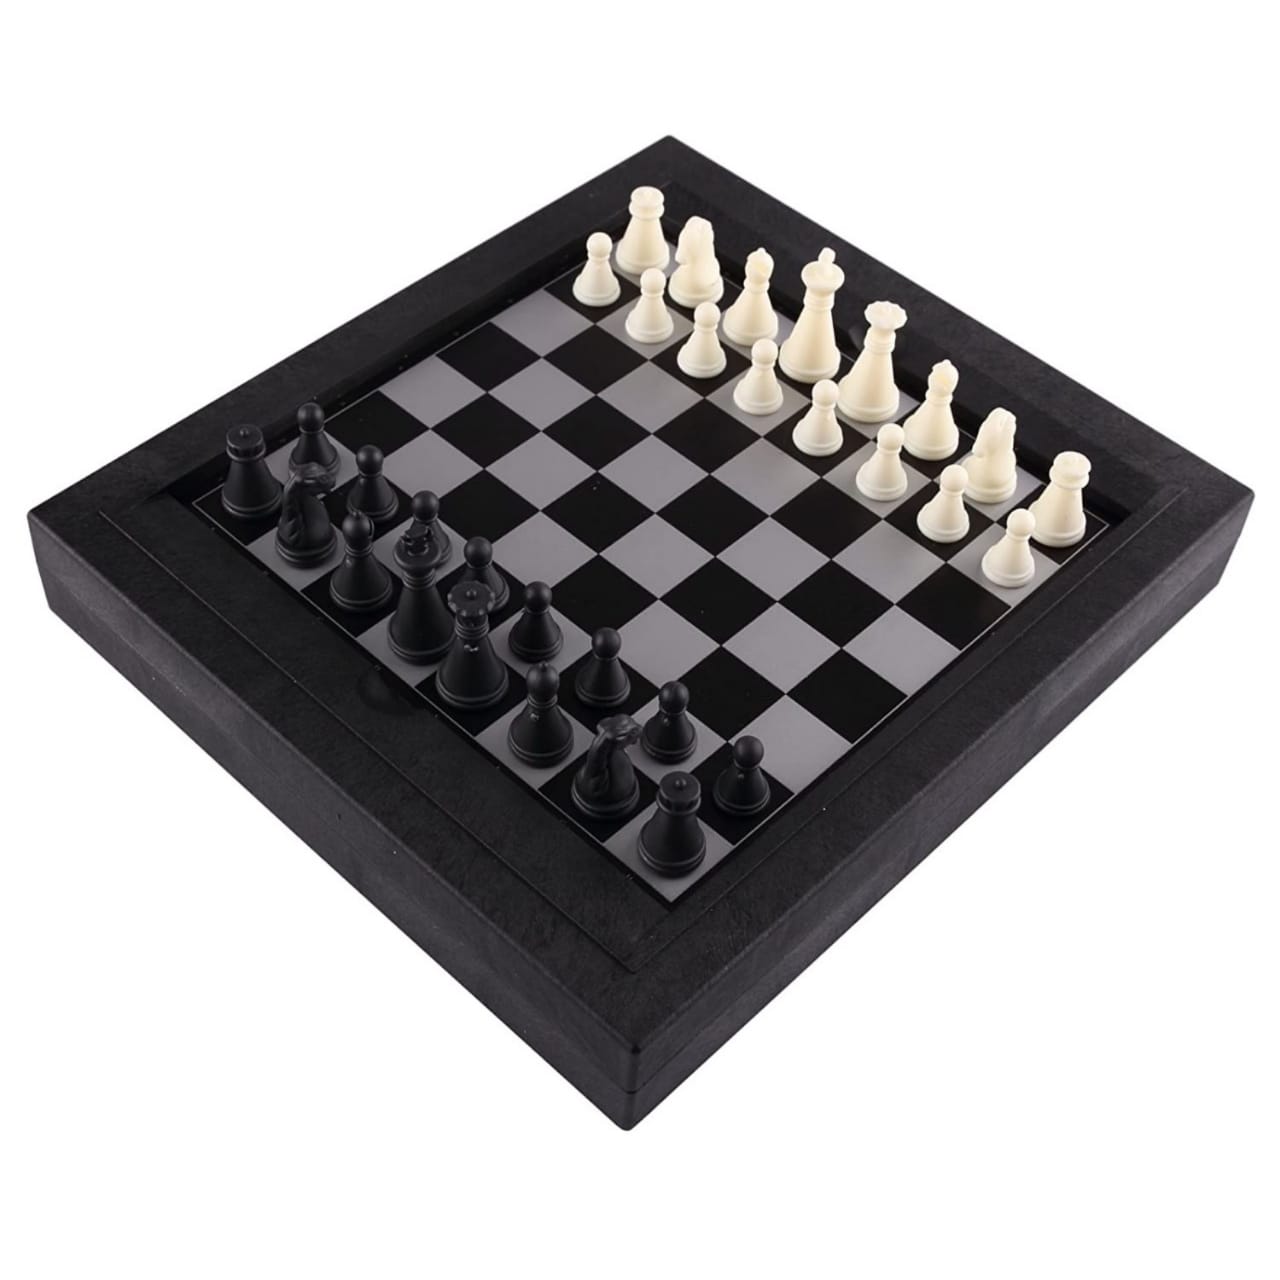 3-in-1 Chess and Checkers and Backgammon Folding Board Games For Kids and Adults